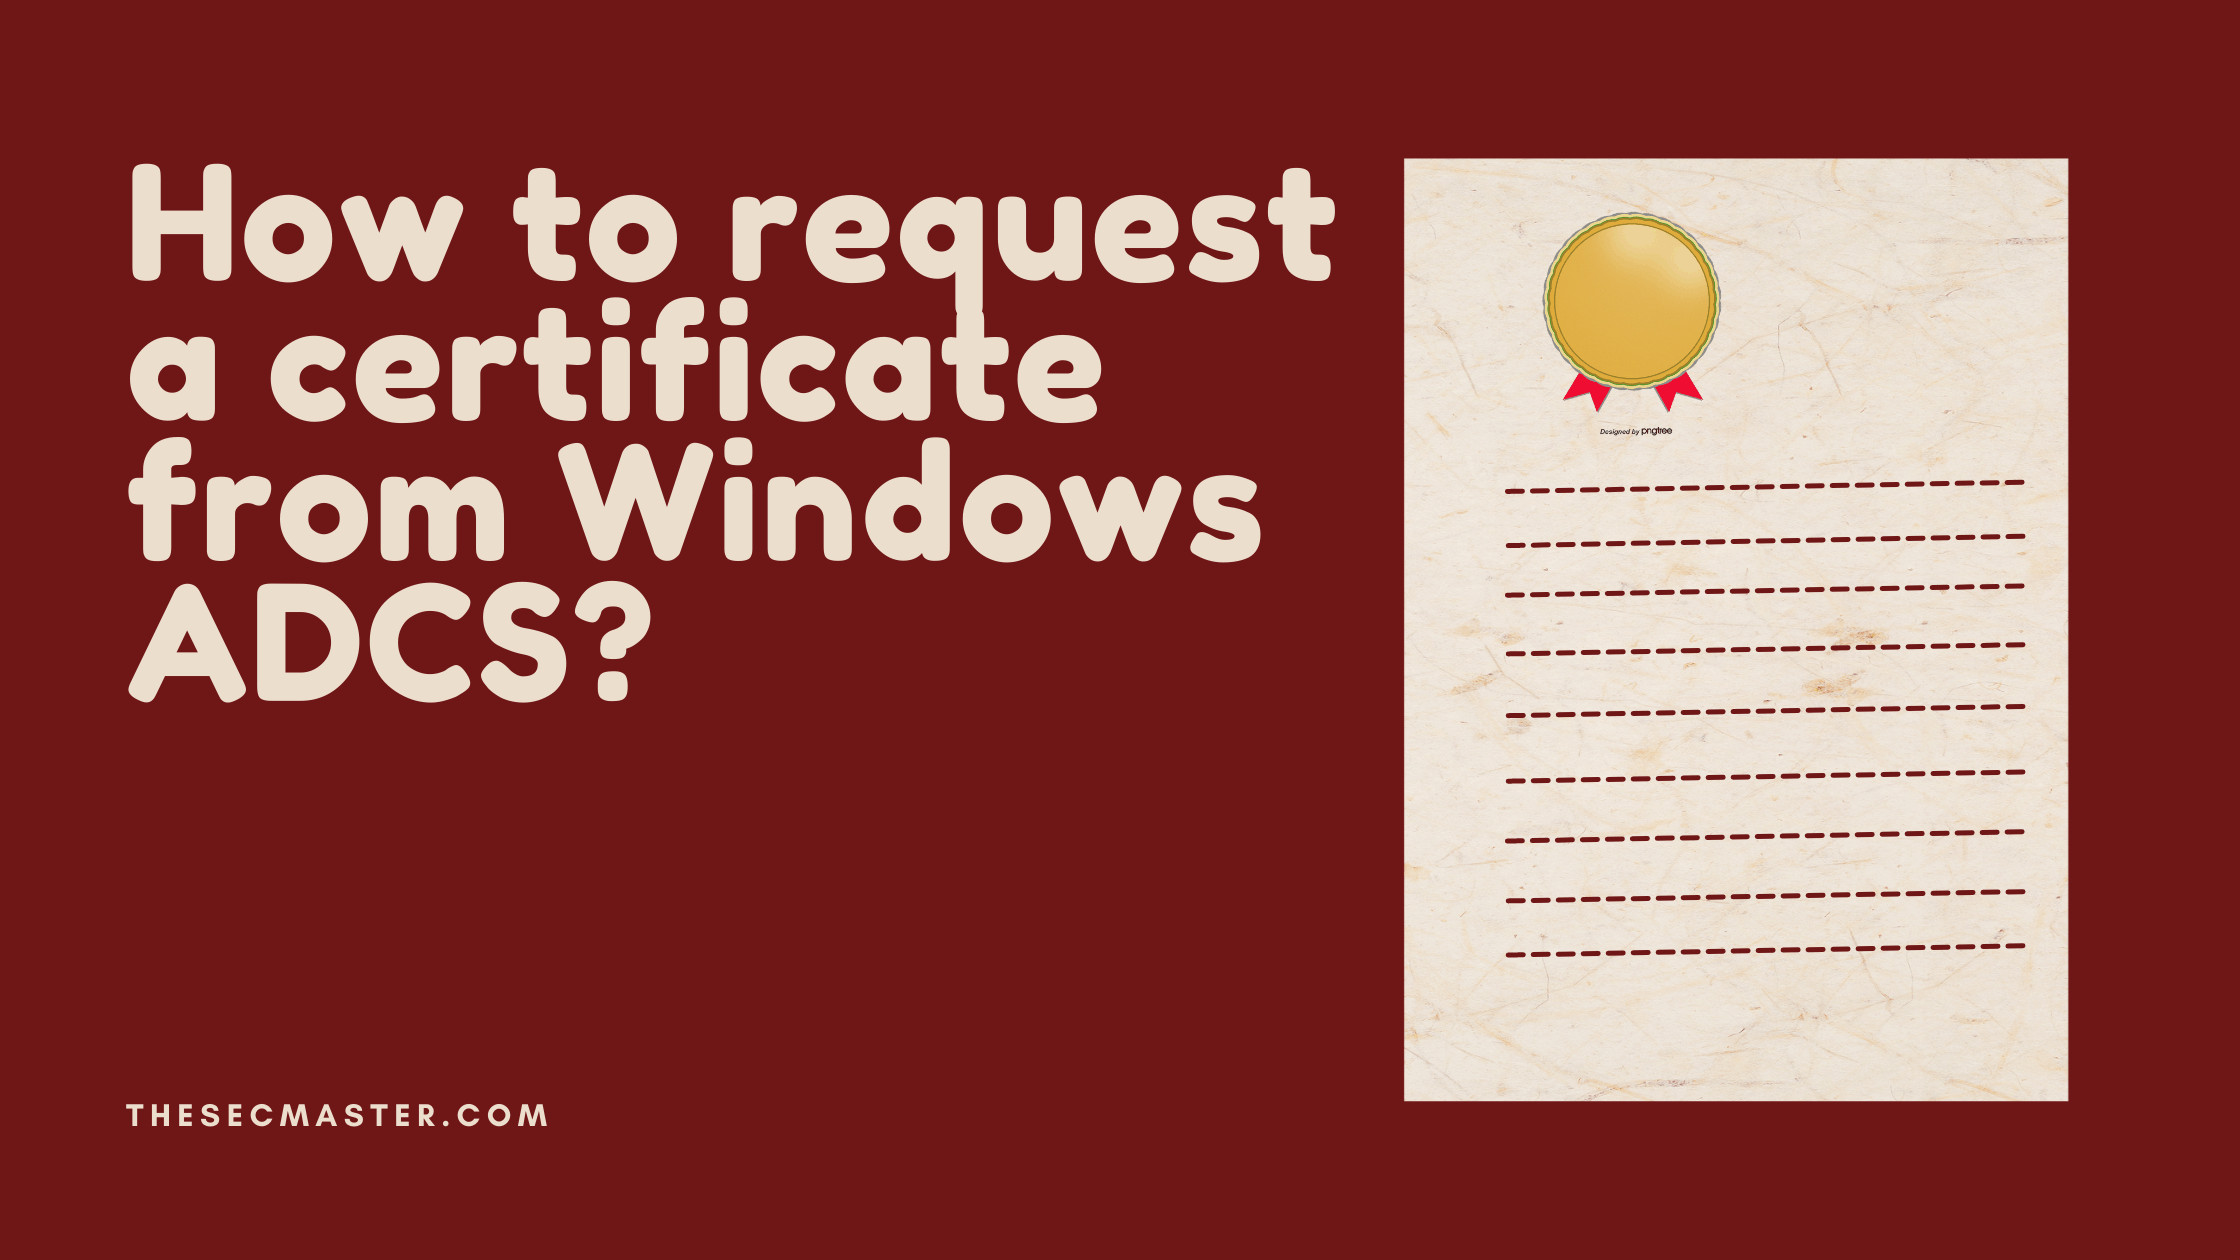 How To Request A Certificate From Windows Adcs